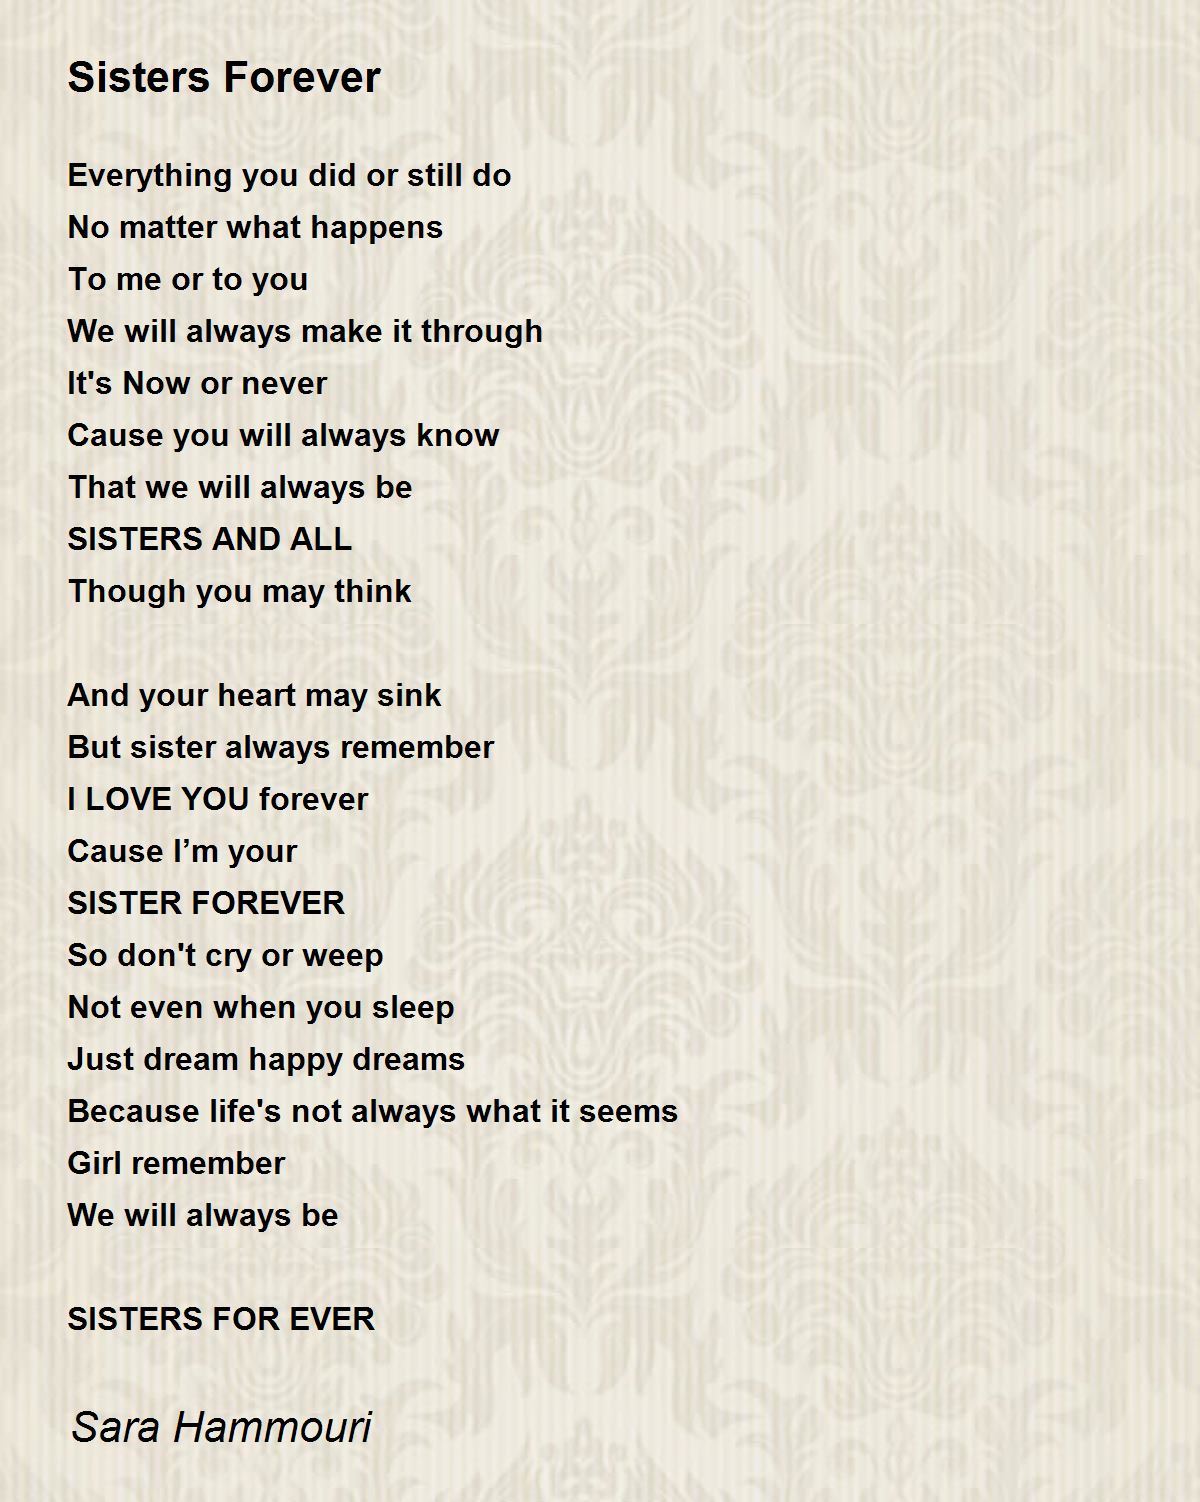 Sisters Forever - Sisters Forever Poem by Sara Hammouri